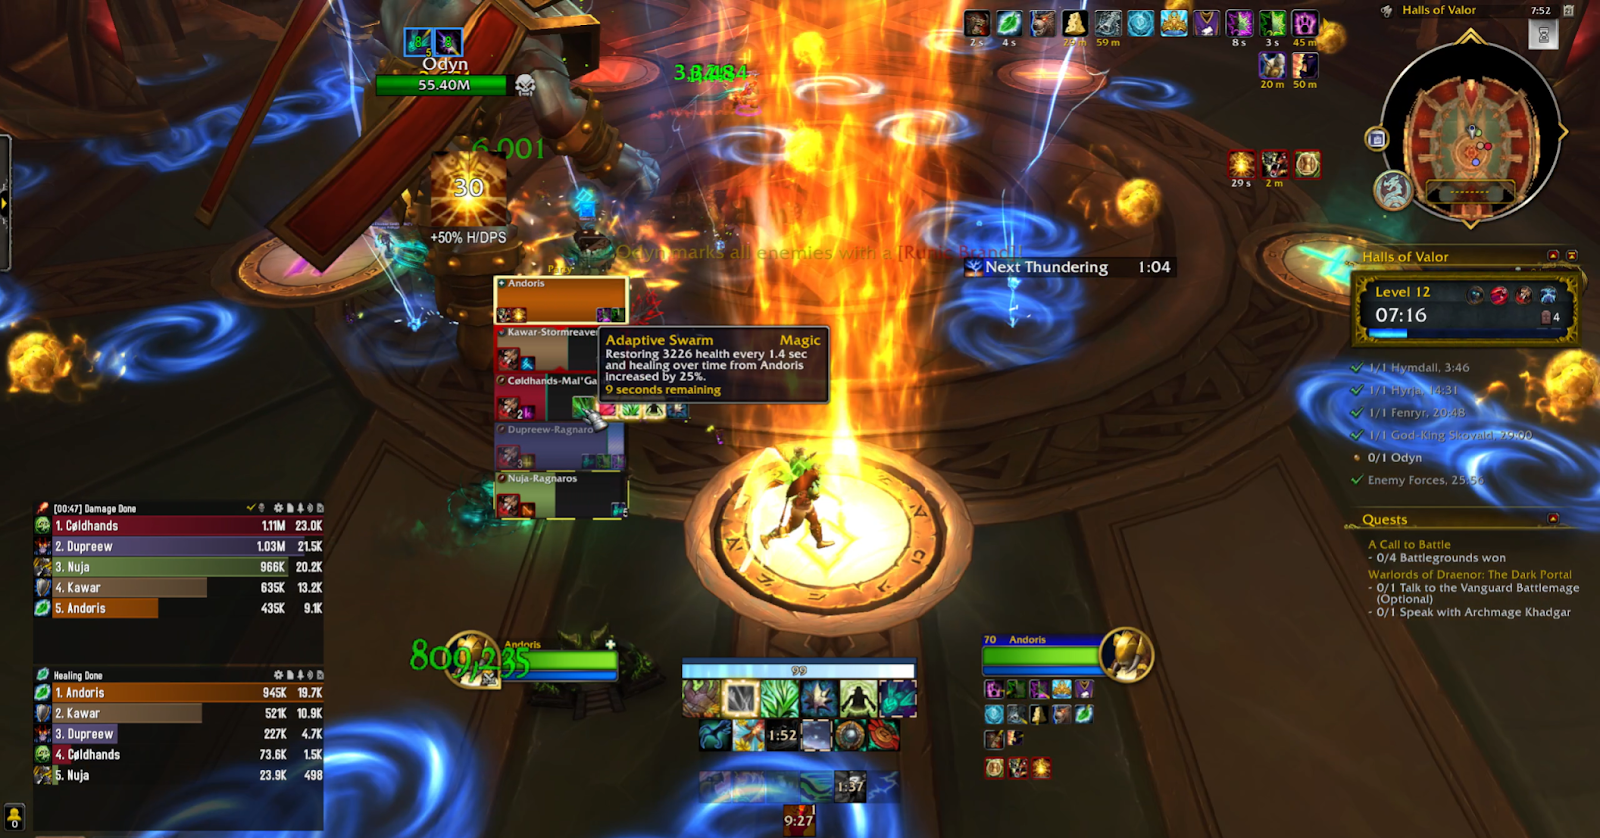 Screenshot of Halls of Valor mythic plus dungeon run in World of Warcraft